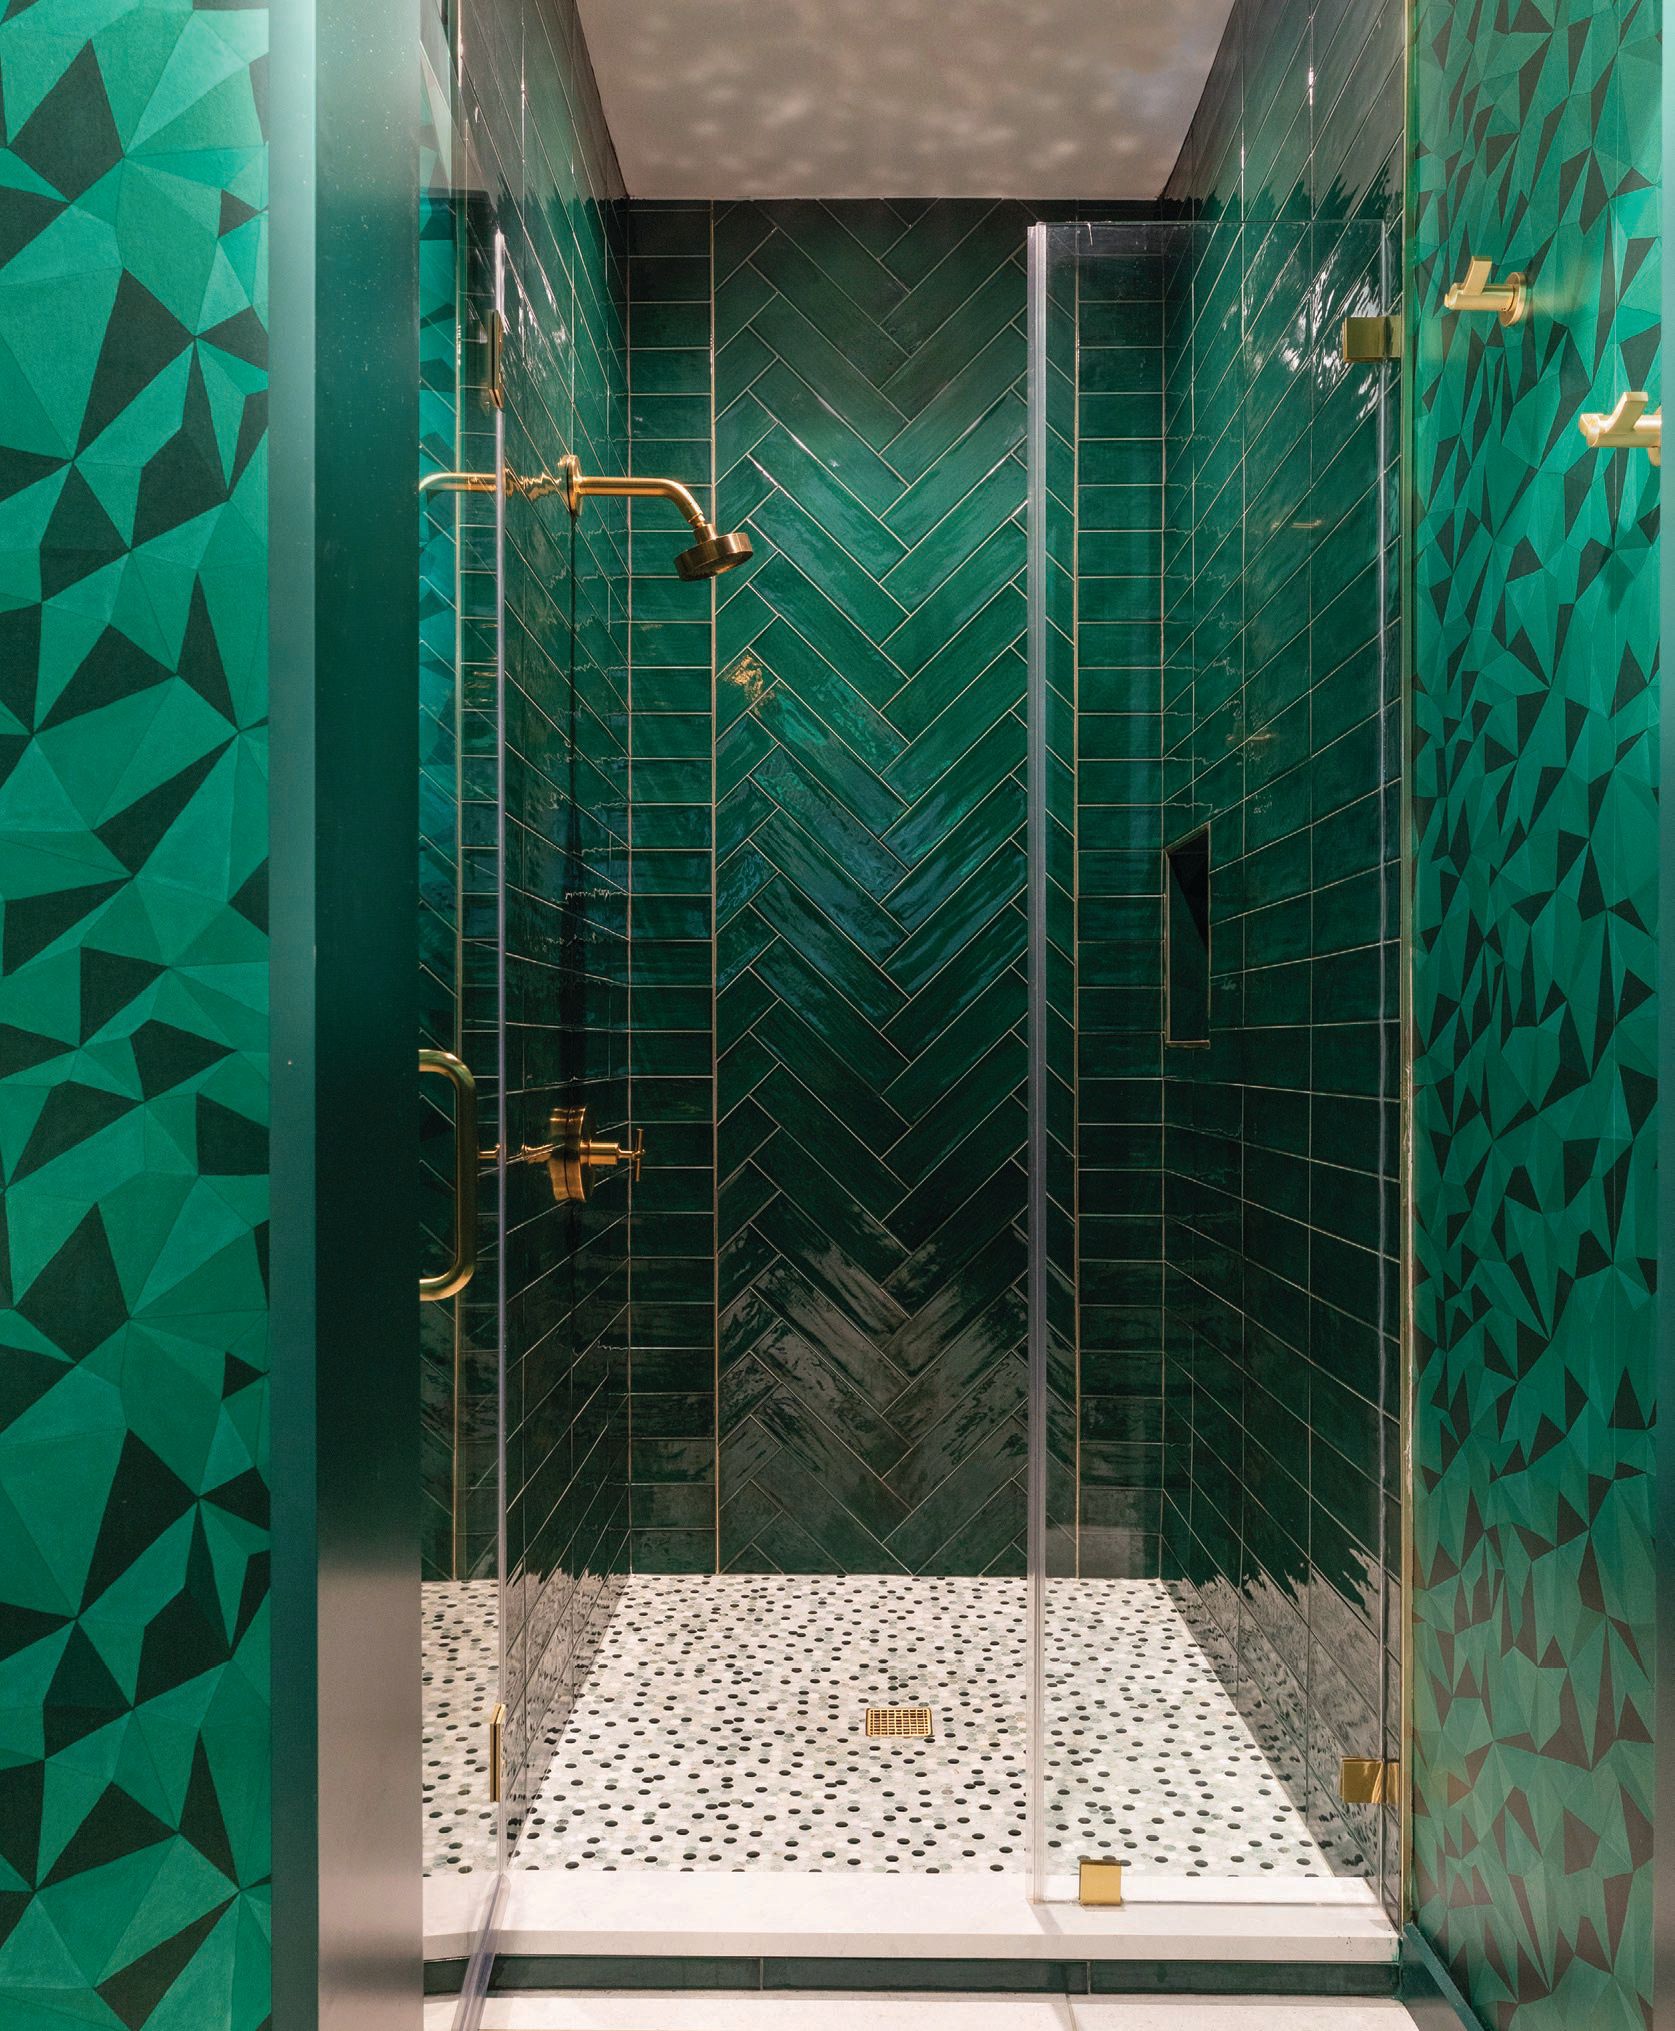 The shower floor tile, made of mirrors, marble and glass, in the guest bathroom “reflects the dark green walls so some of the tiles look the exact same color as the walls,” O’Brien notes. PHOTOGRAPHED BY JULIE SOEFER